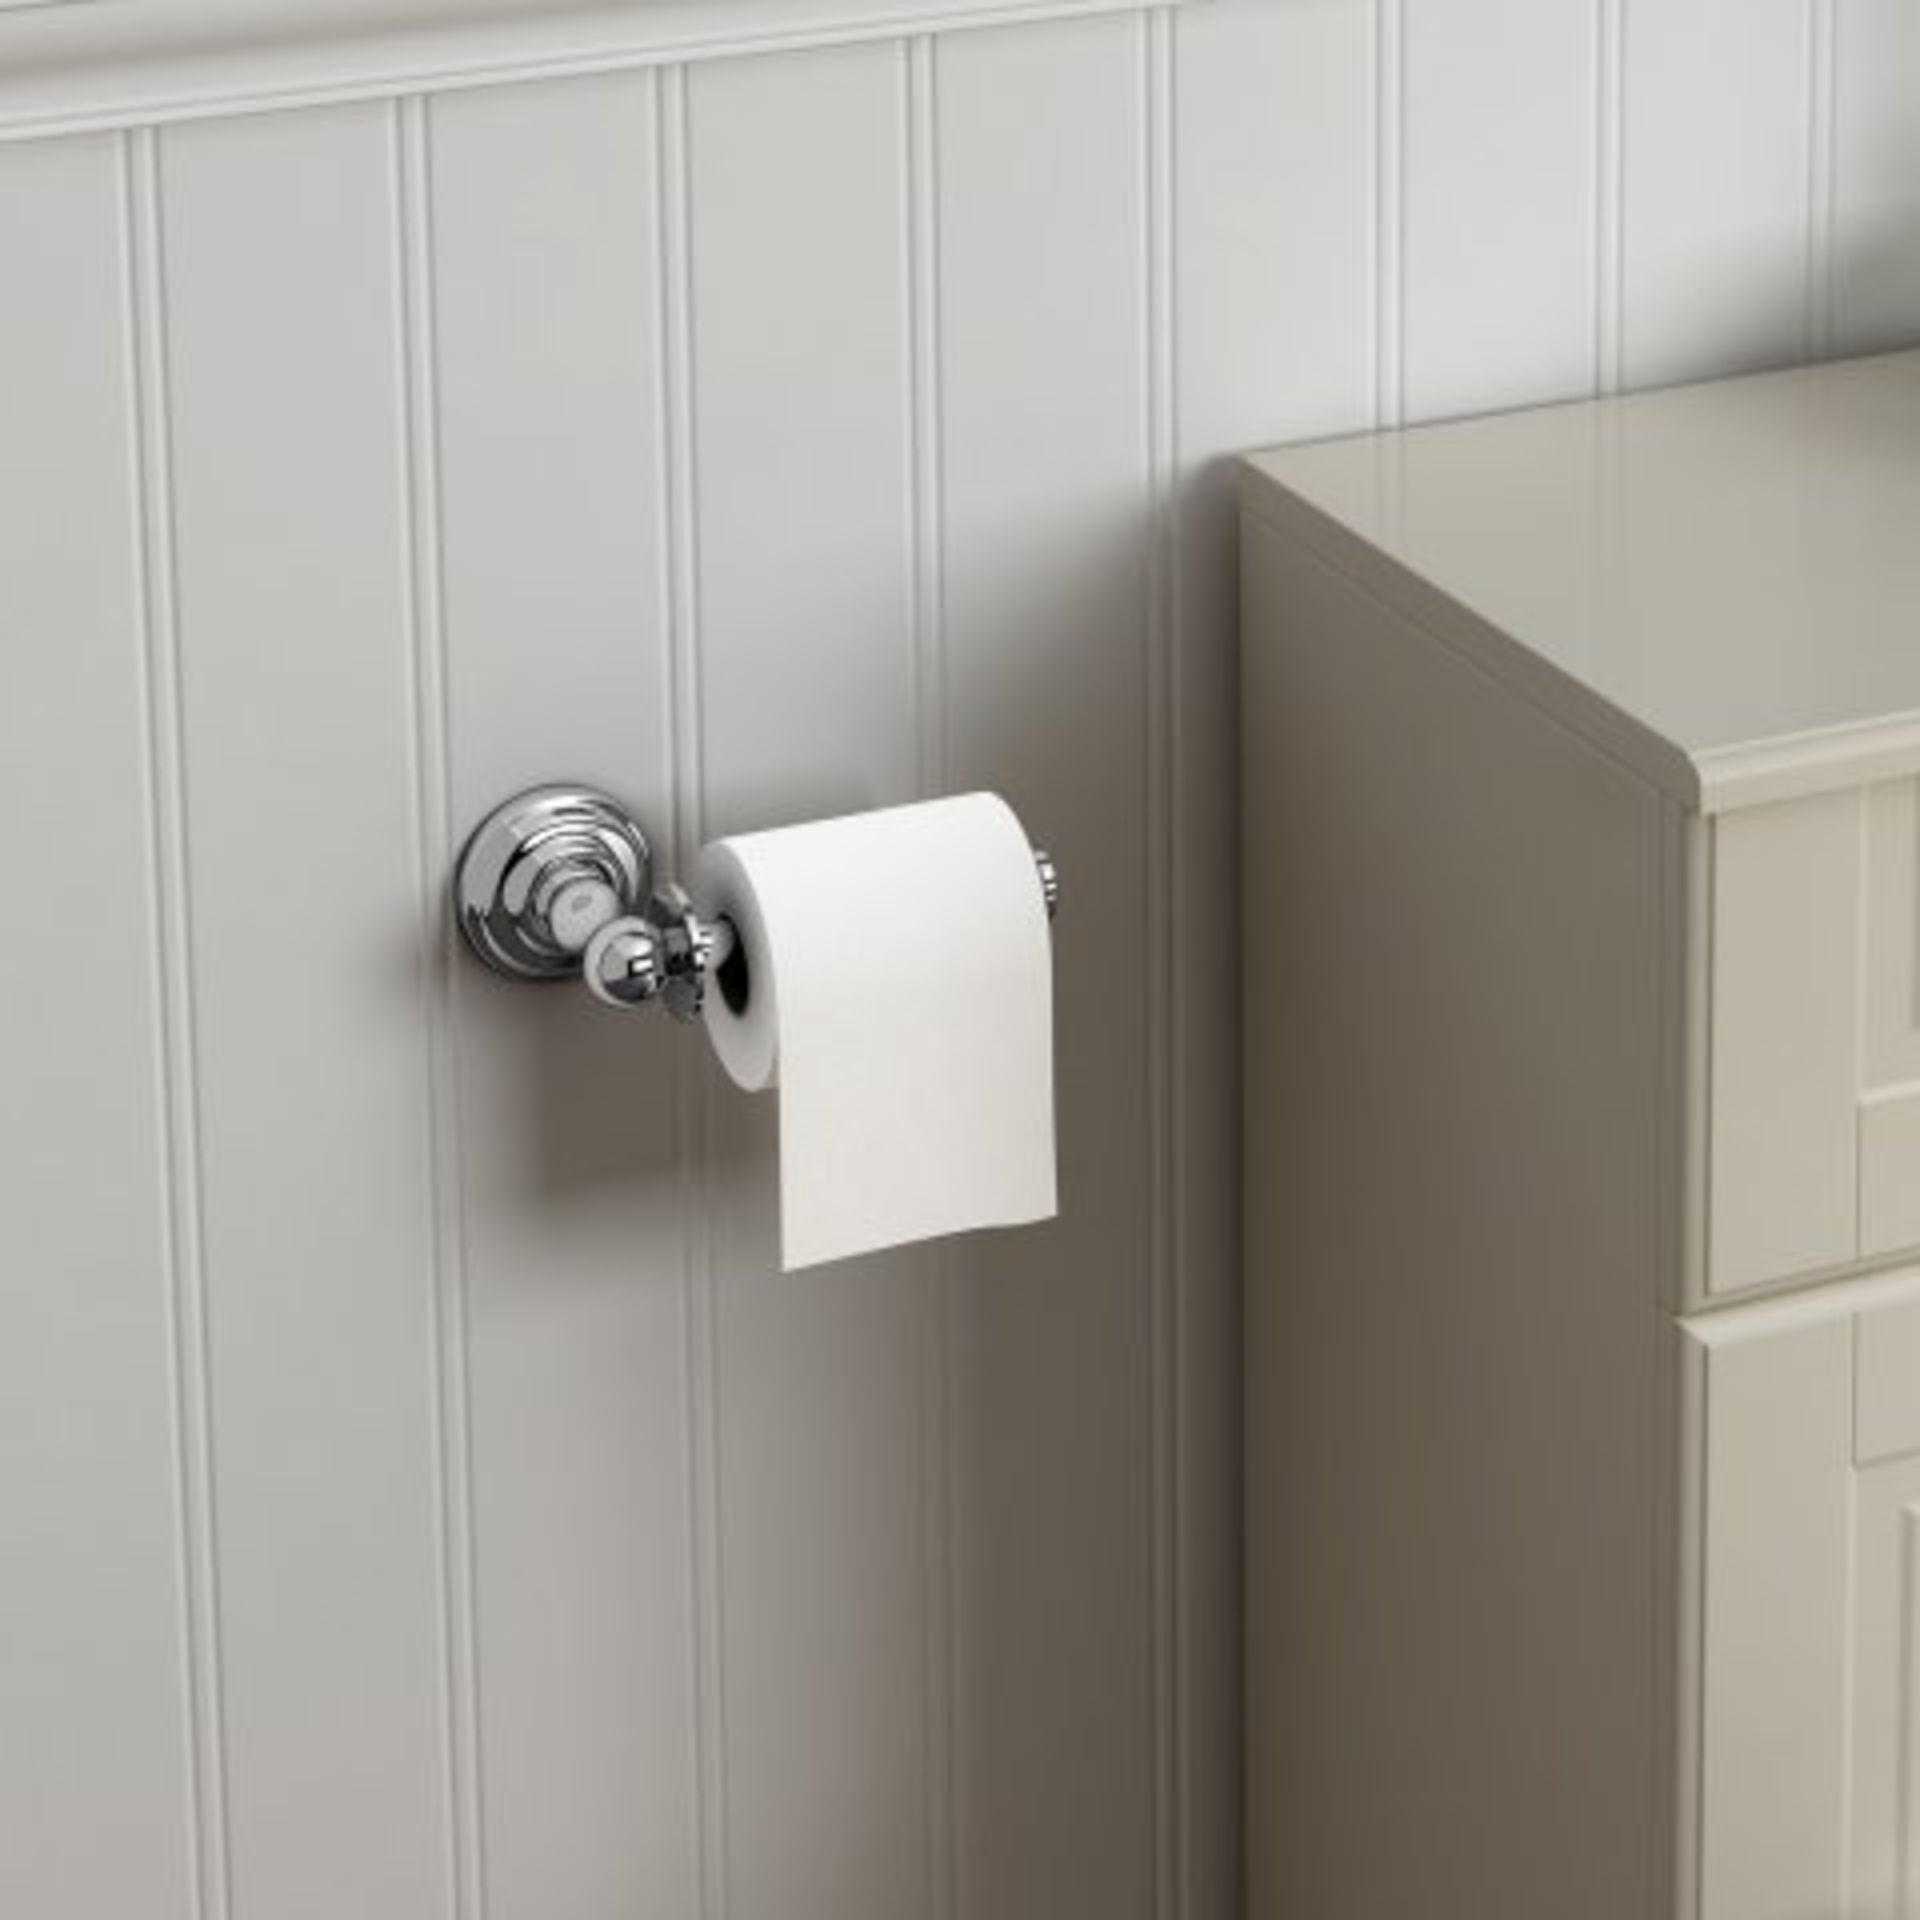 (V73) York Toilet Roll Holder Paying attention to detail can massively uplift your bathroom d?cor. - Image 2 of 2